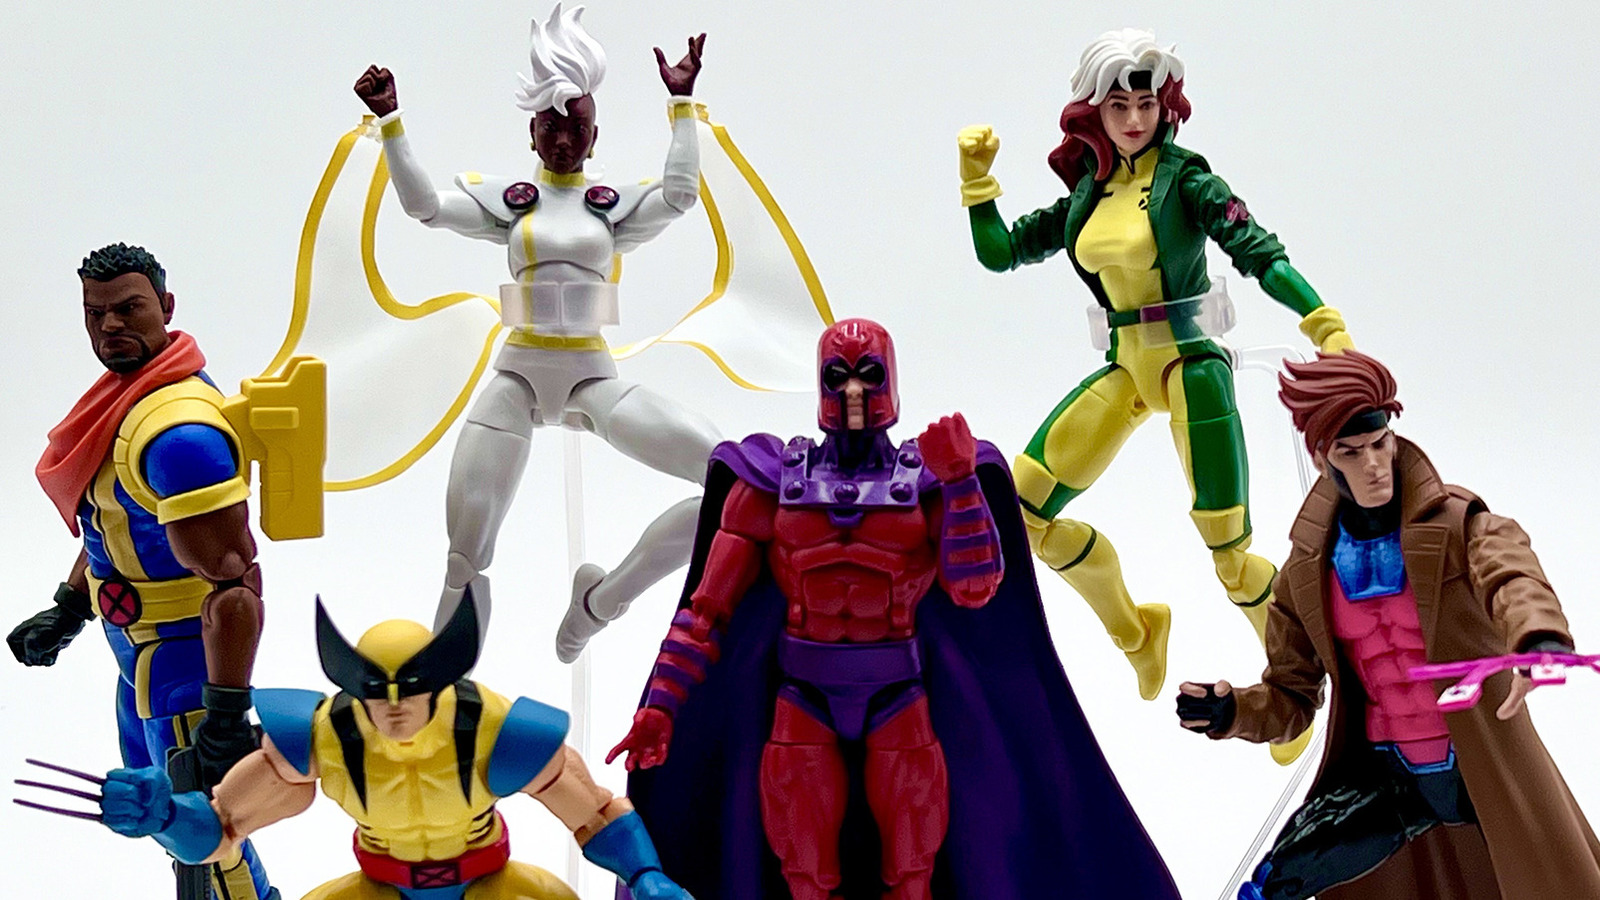 Marvel Legends X-Men '97 Action Figures Rule, But Could Use More
Accessories